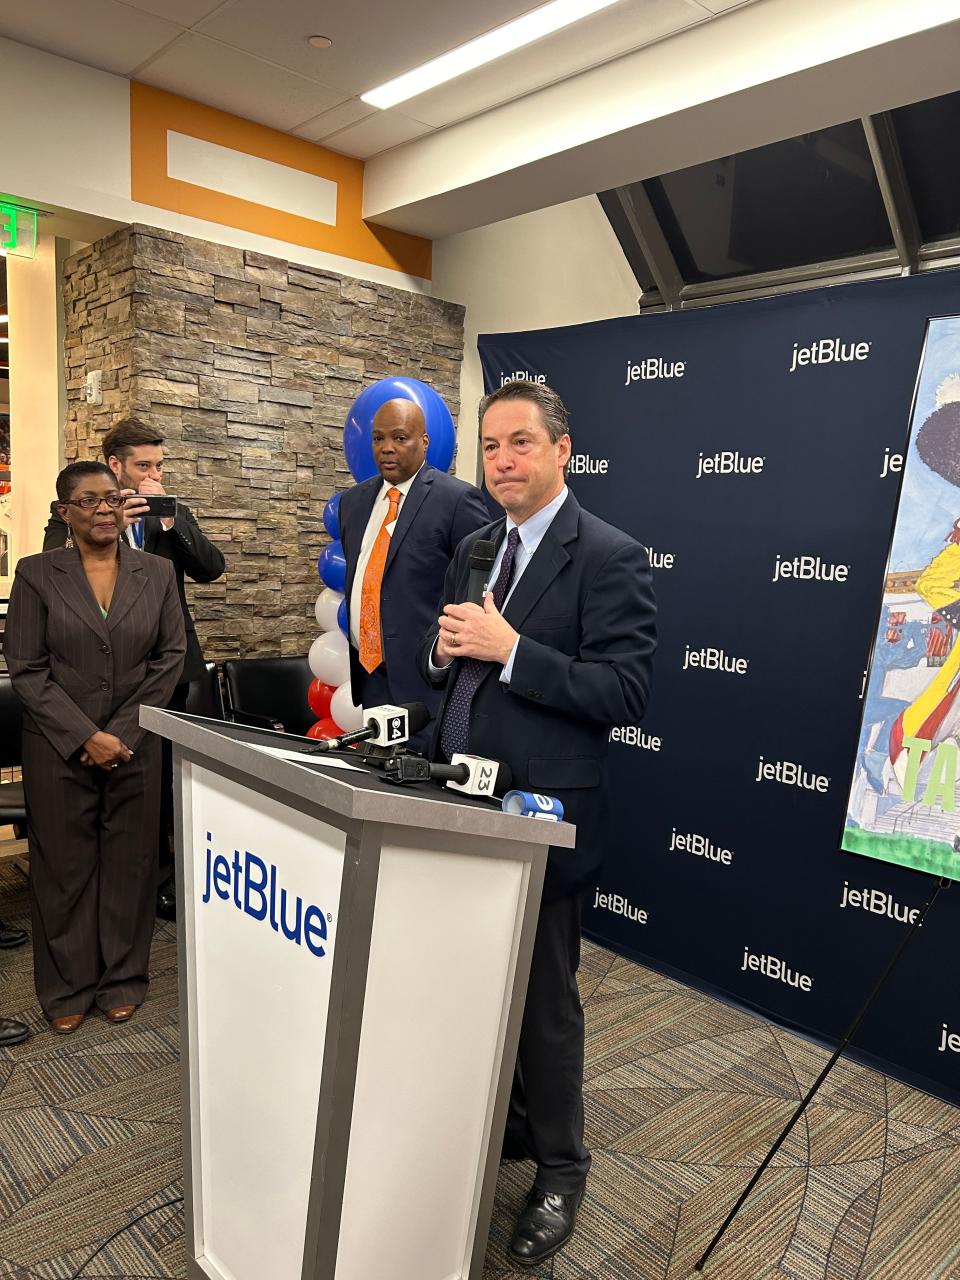 JetBlue General counsel Robert Land announces $49 one-way flights between Fort Lauderdale and Tallahassee. The inaugural flight was Jan. 4.